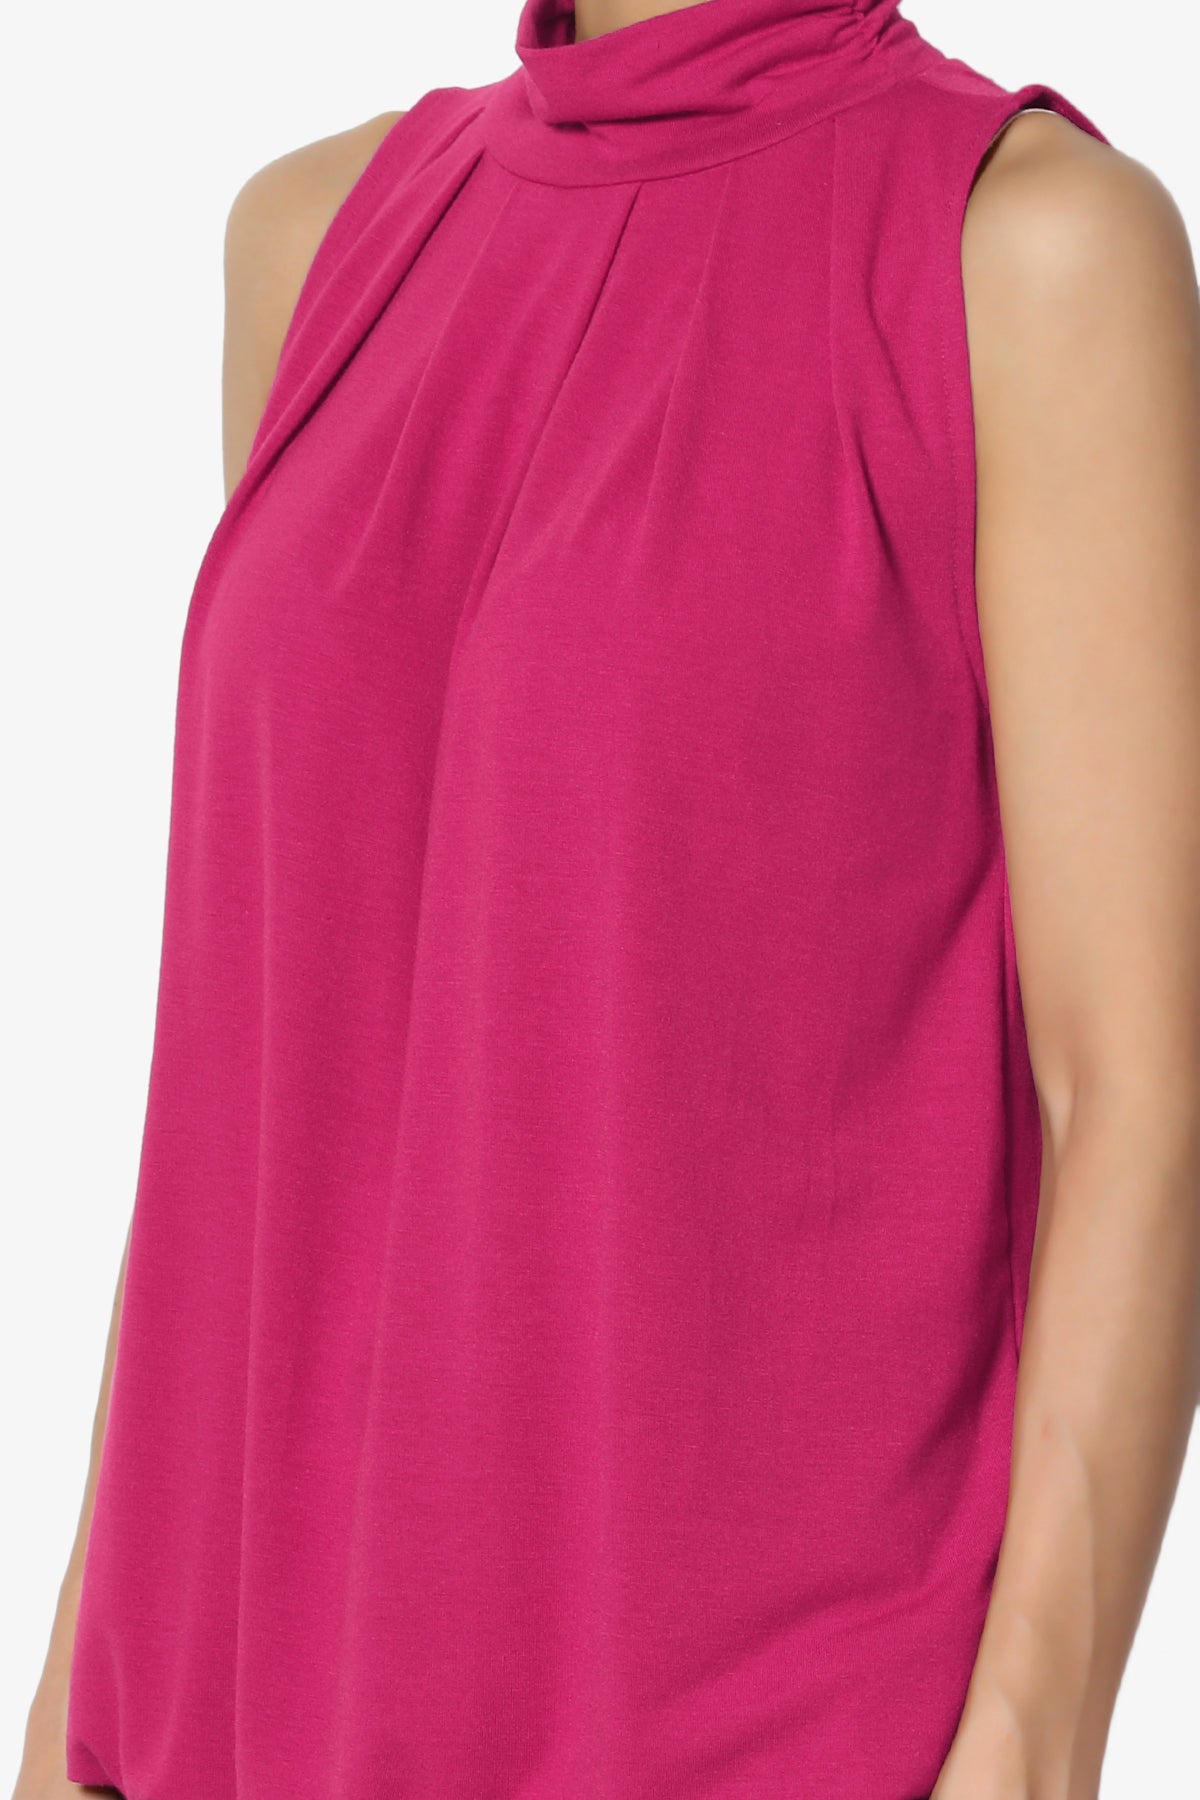 Load image into Gallery viewer, Jibbitz Sleeveless Mock Neck Pleated Top MAGENTA_5
